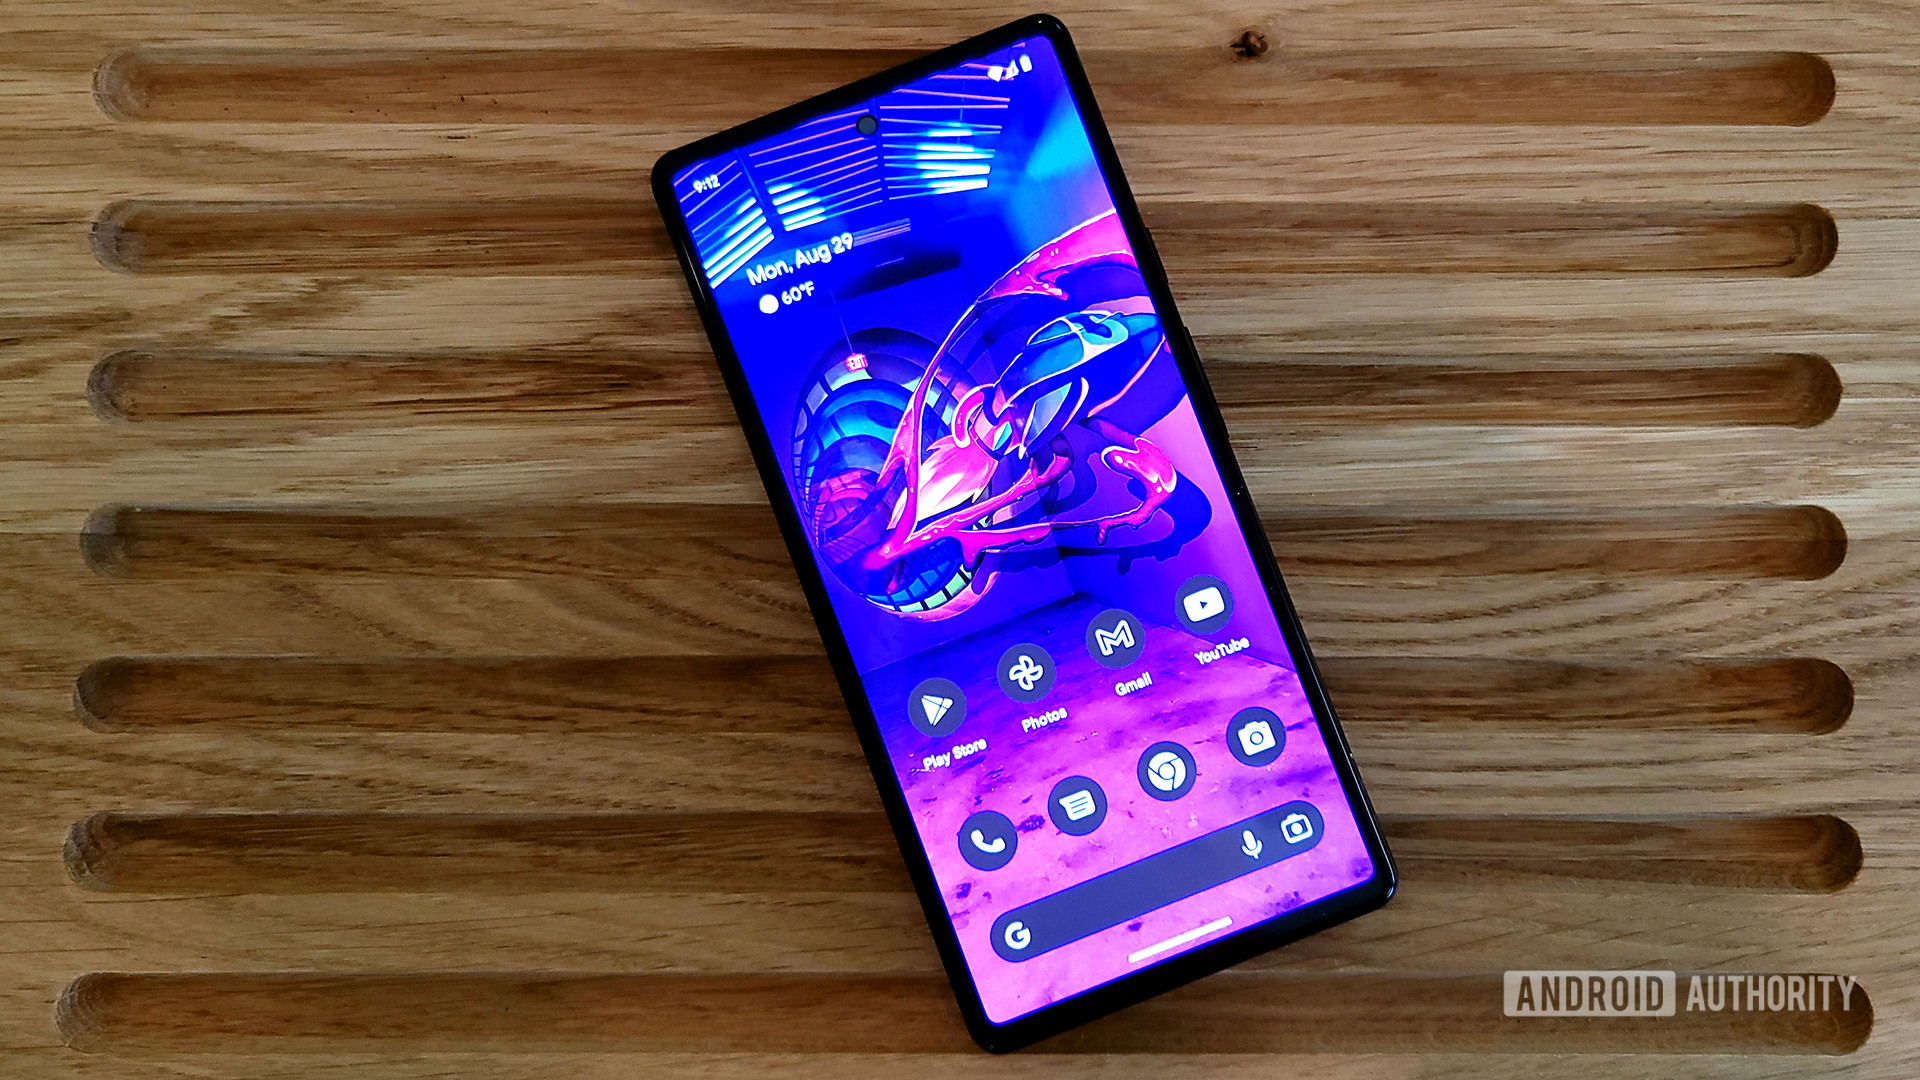 Wallpaper Wednesday: Android wallpapers 2022-08-31 - Android Authority